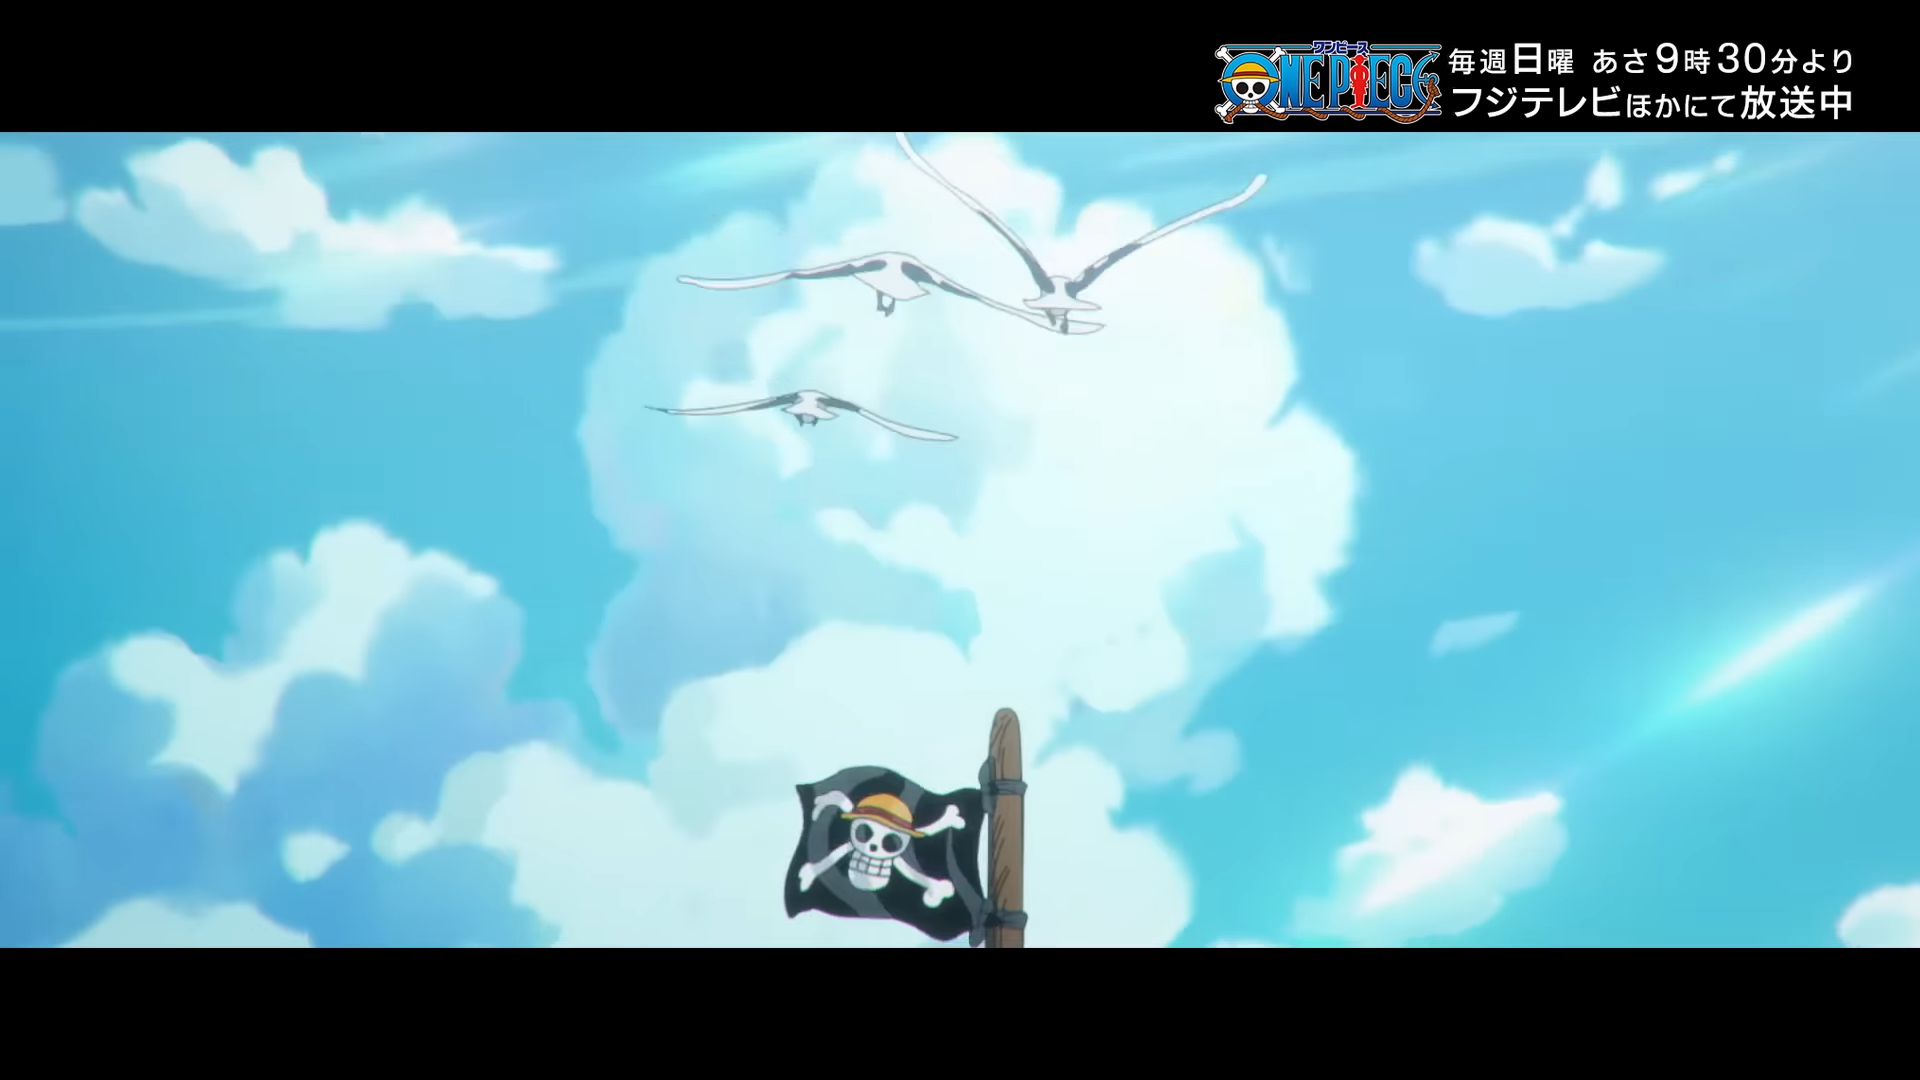 Screenshot from One Piece ED